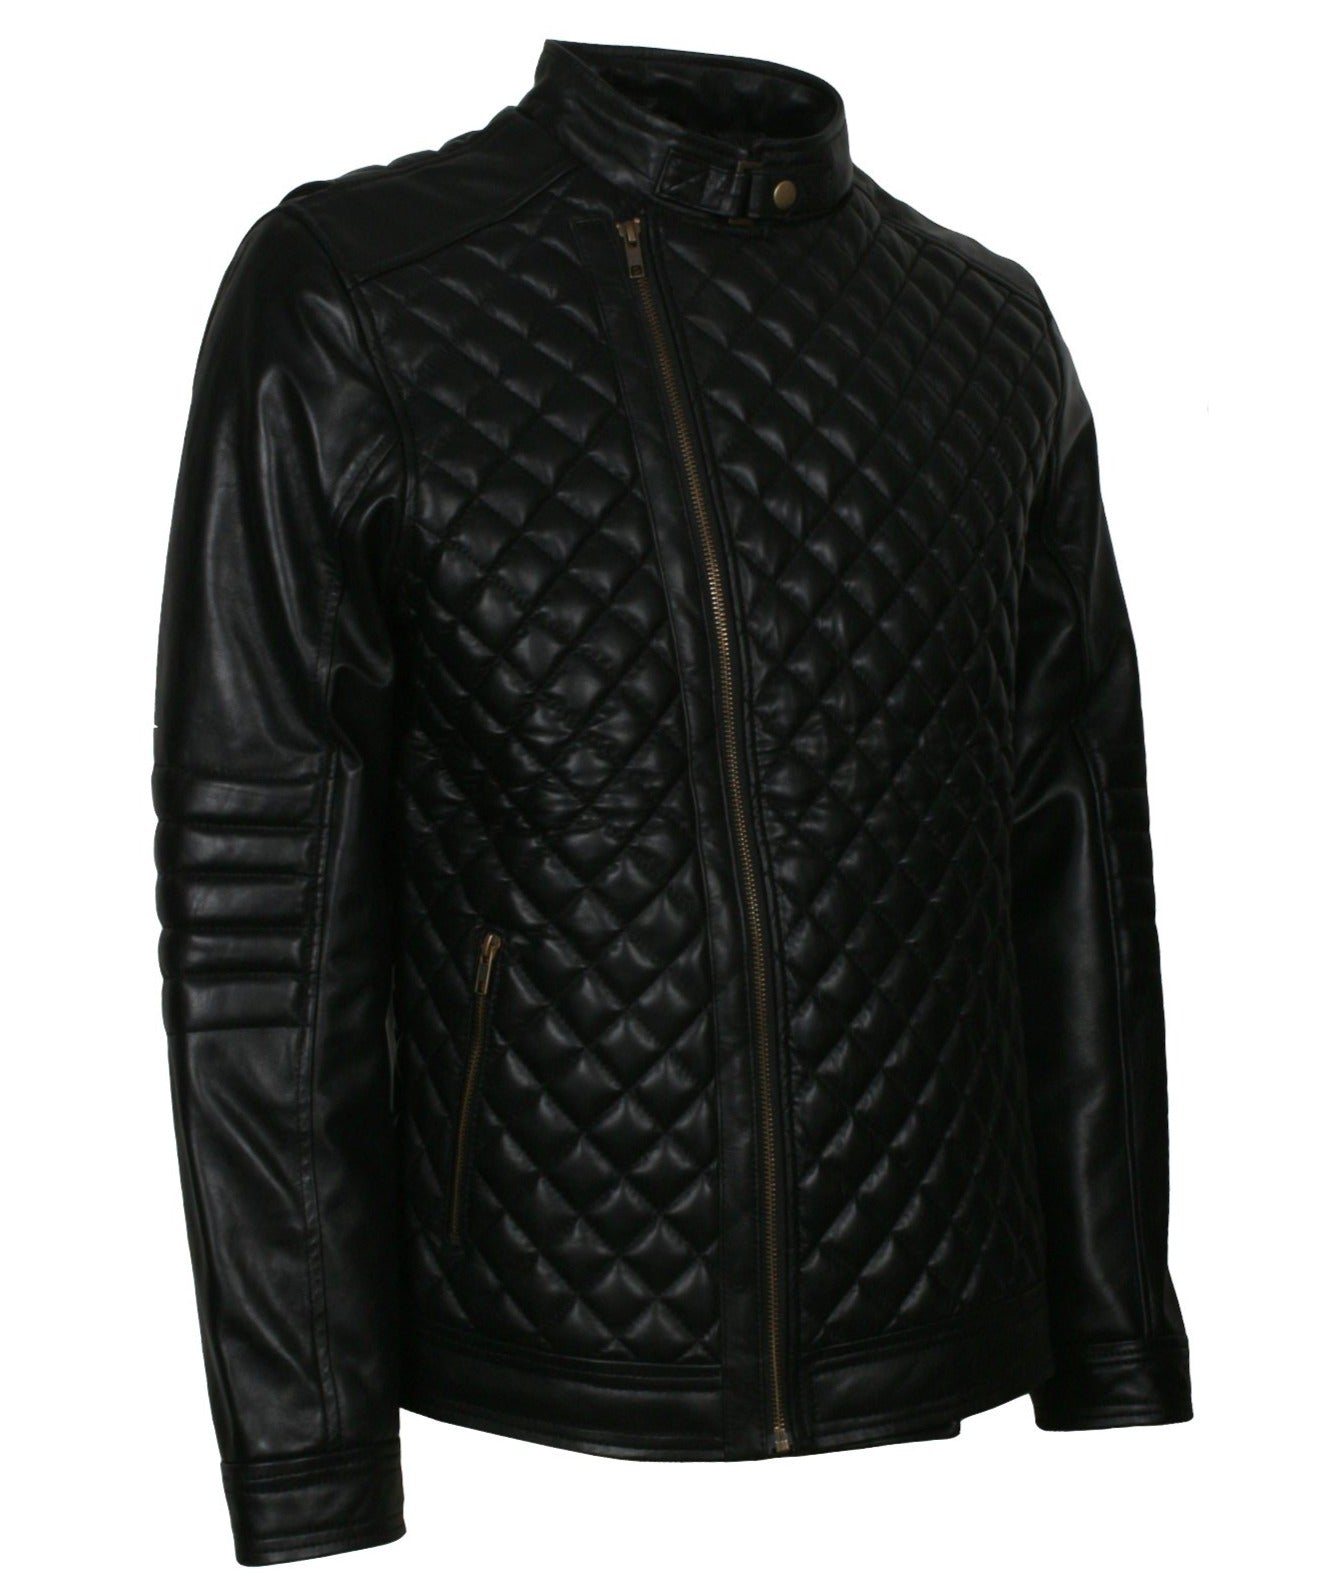 Black Quilted Leather